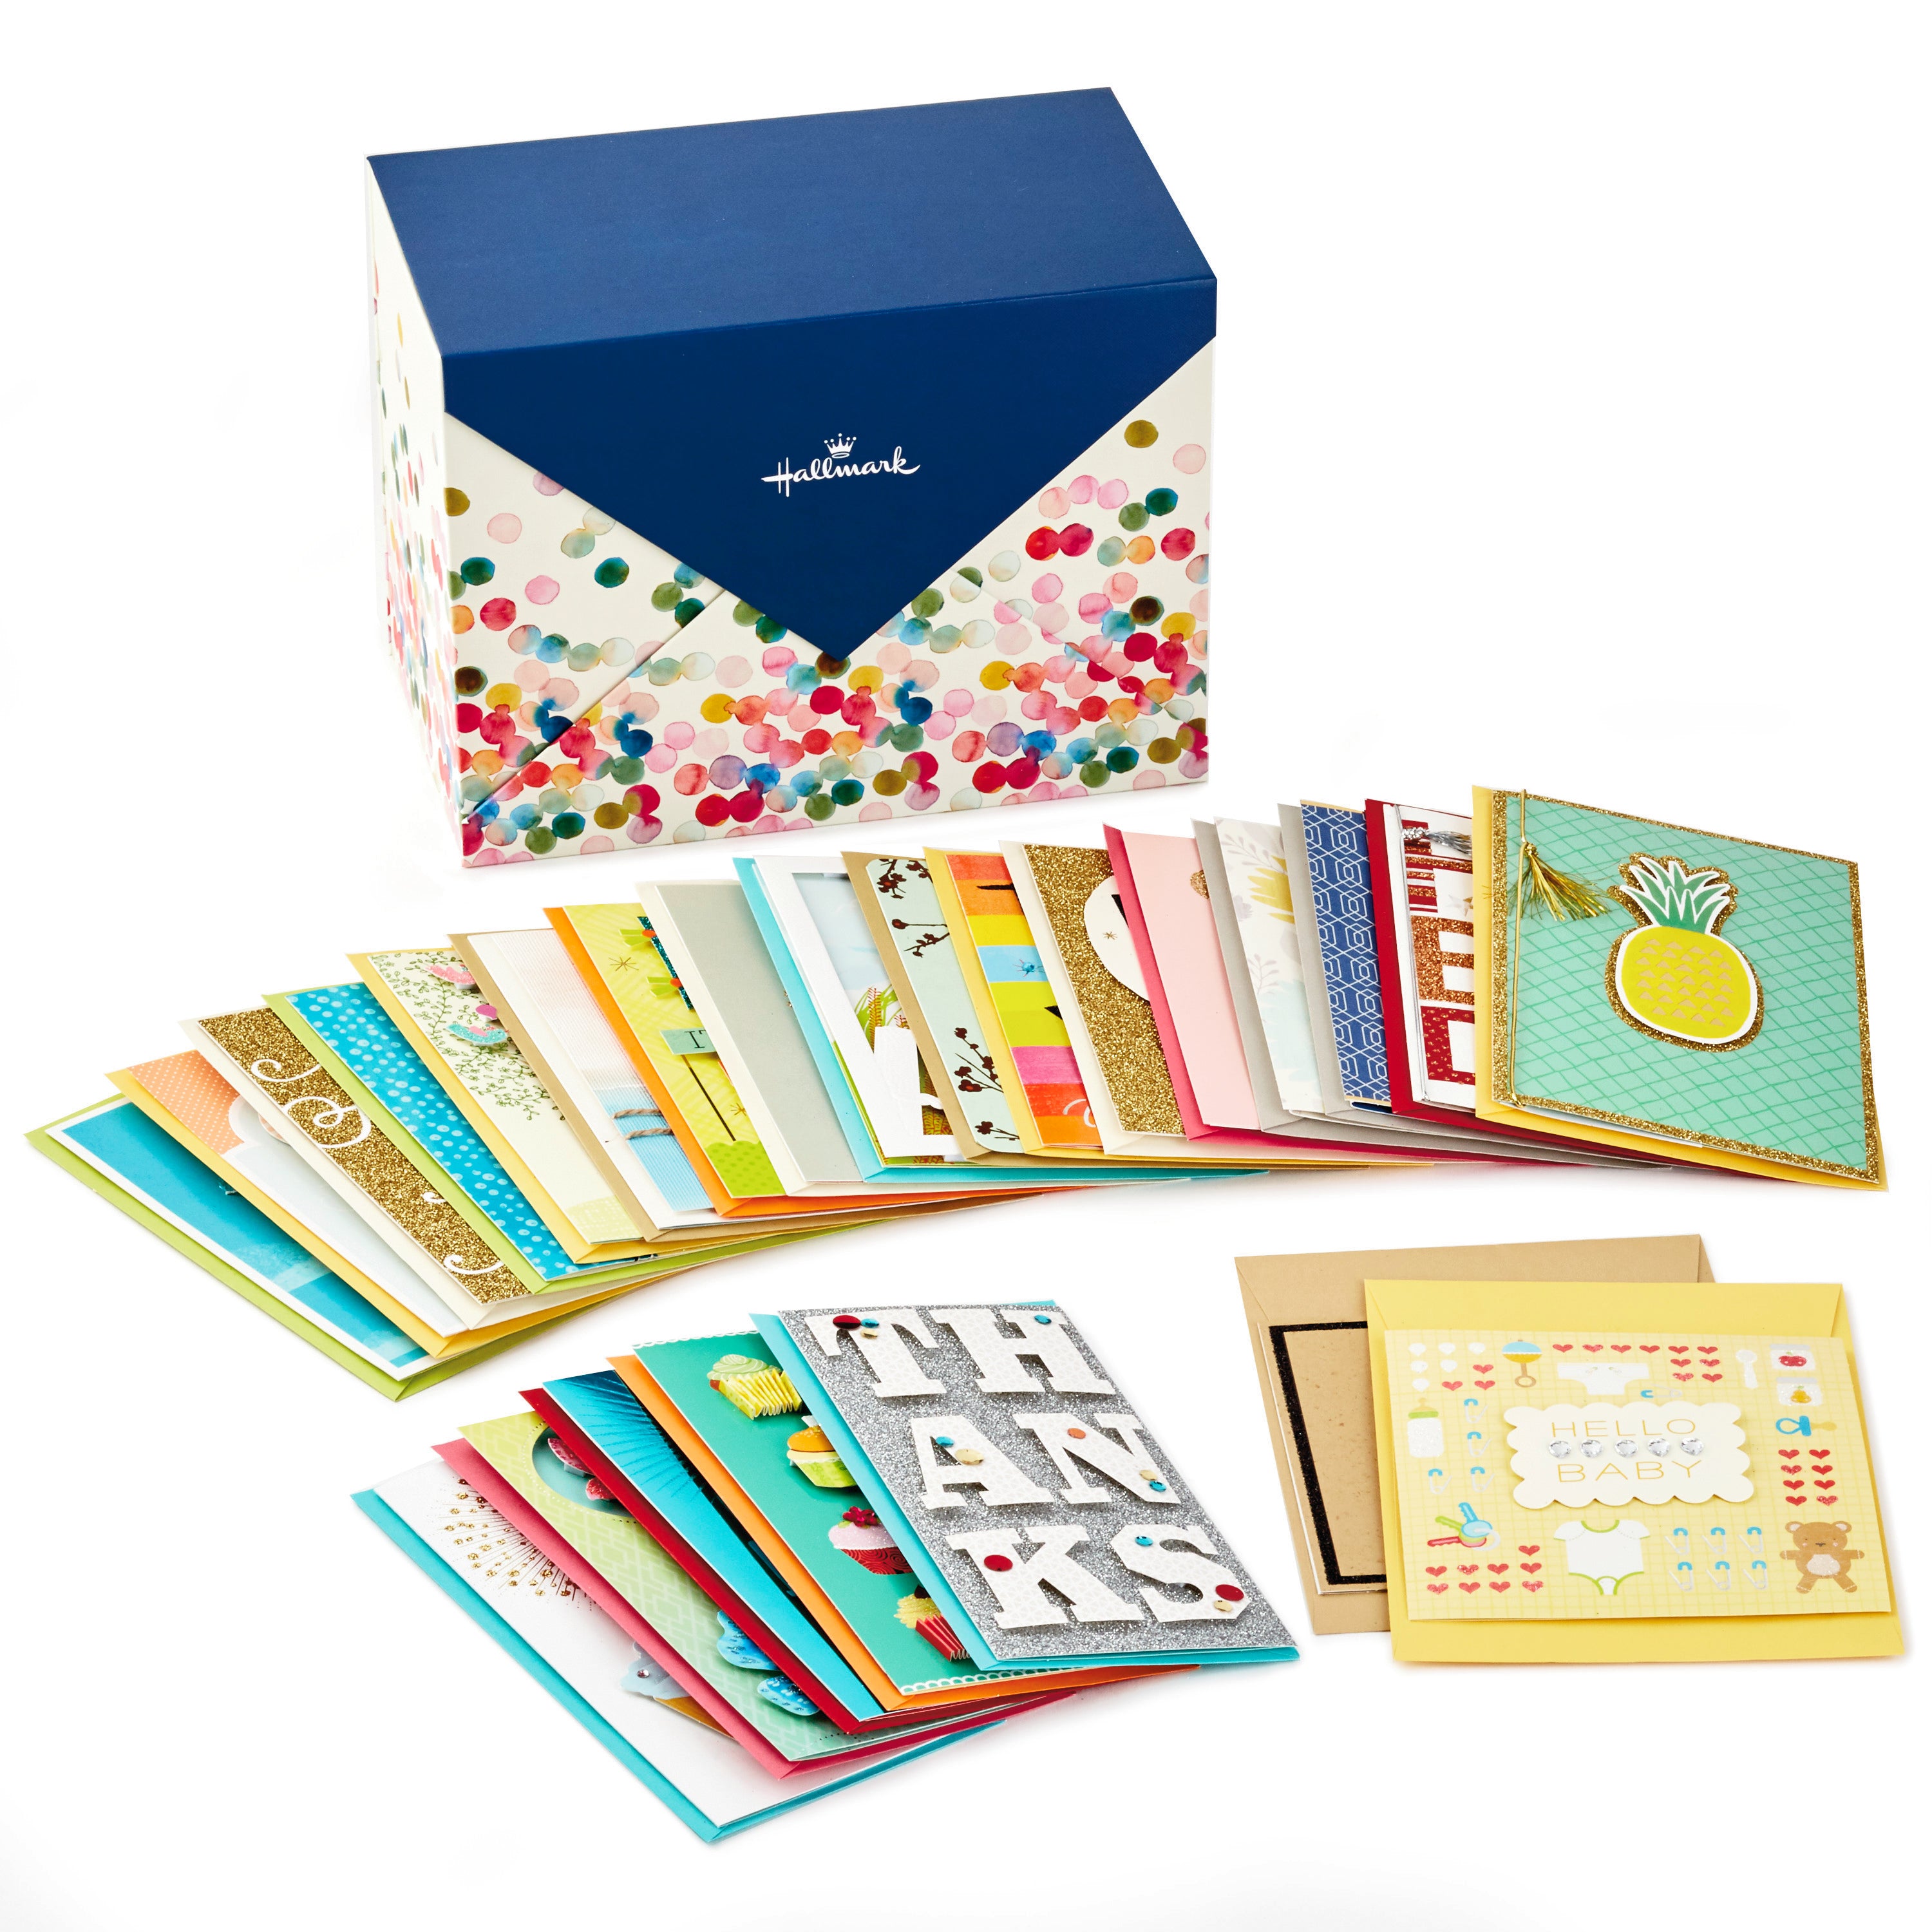  100 All Occasion Cards Assortment Box with Envelopes and  Stickers - Large 5x7 Inch Bulk Greeting Cards and Blank Notes, 100 Unique  Designs in a Sturdy Card Organizer Box : Office Products